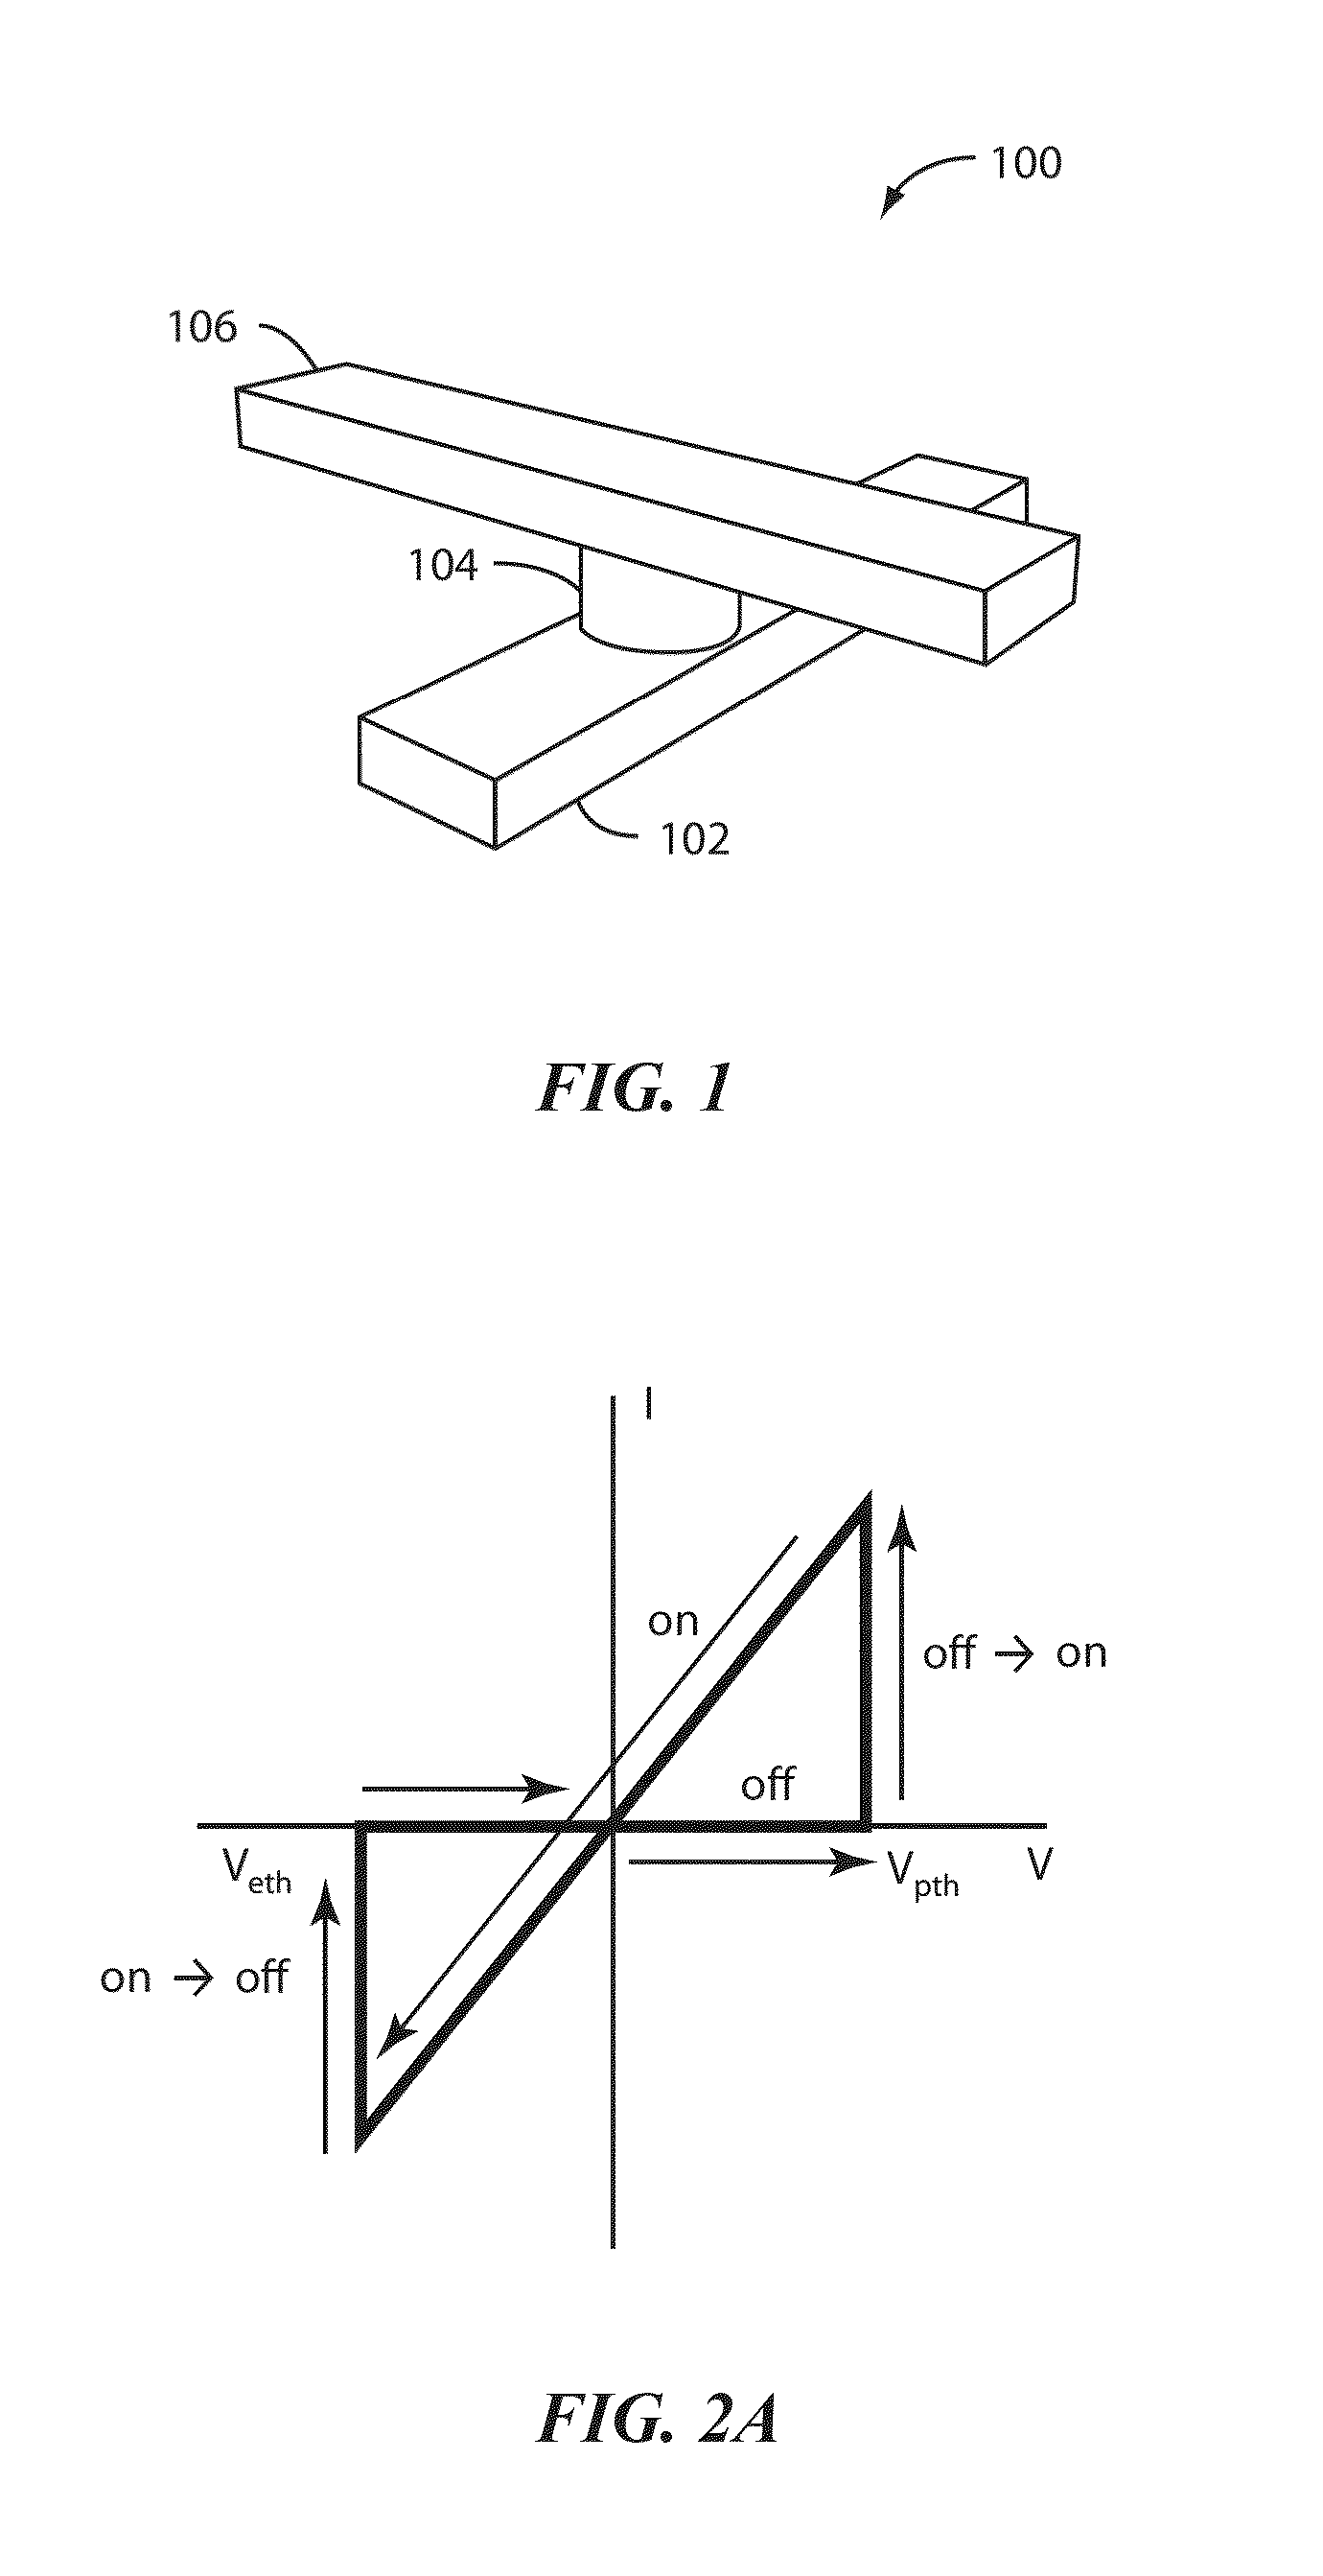 Resistive switching device for a non-volatile memory device